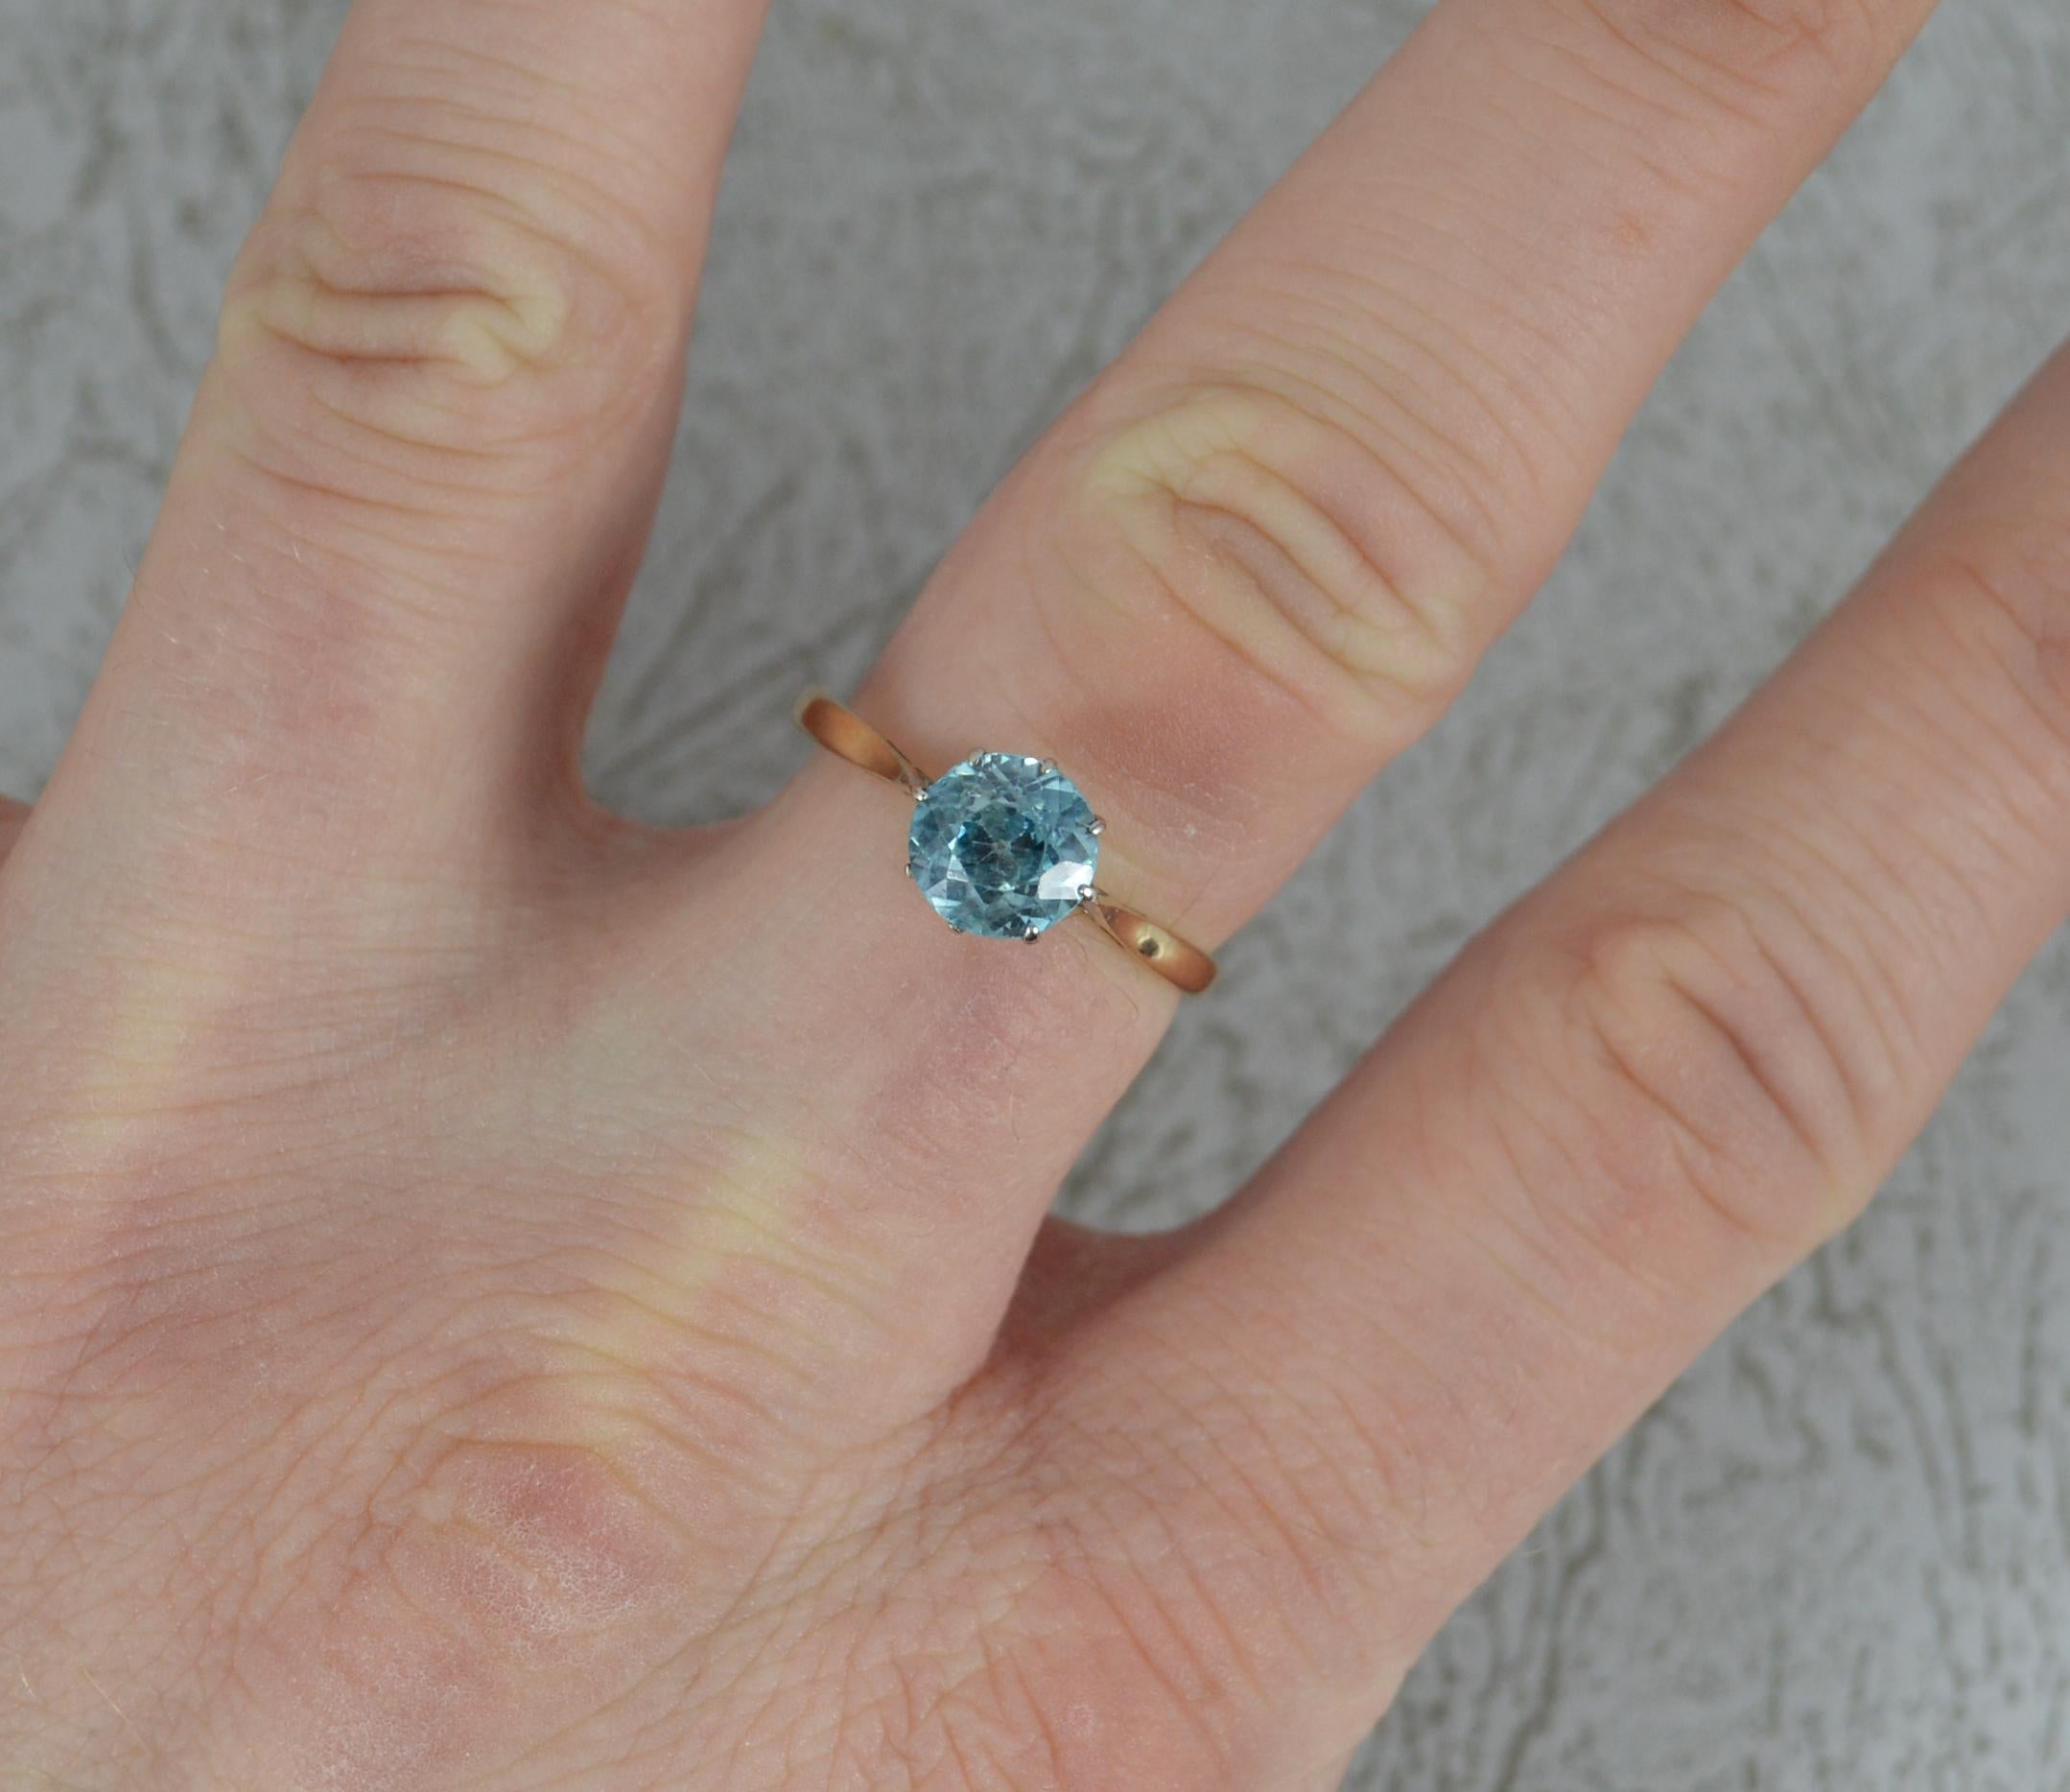 
A fine vintage solitaire ring. Claw set blue zircon. Solid 9 carat gold.

6.9mm diameter zircon to centre. 1.7 grams.

Size Q UK, 8 US.

Clean shank. Securely set stone, some claws worn than others. Light general wear to edges and facet edges.